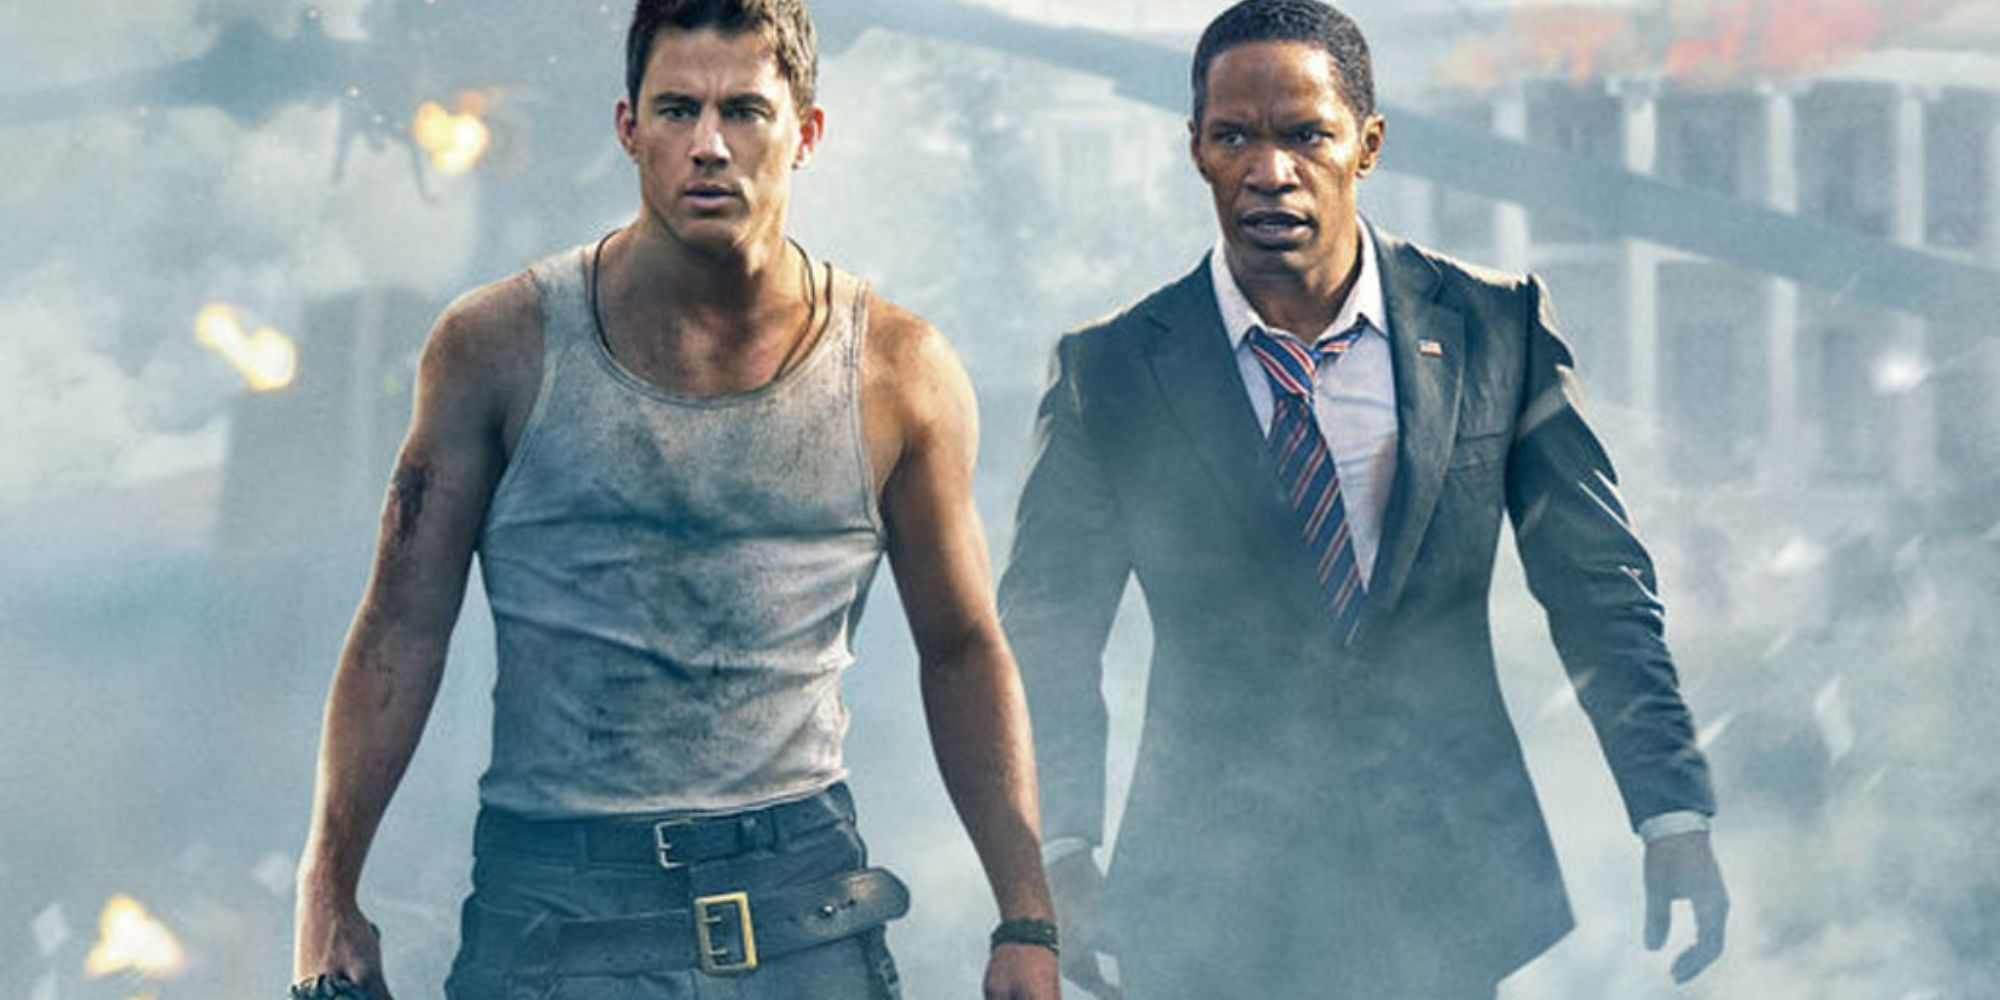 Promotional image for 'White House Down'